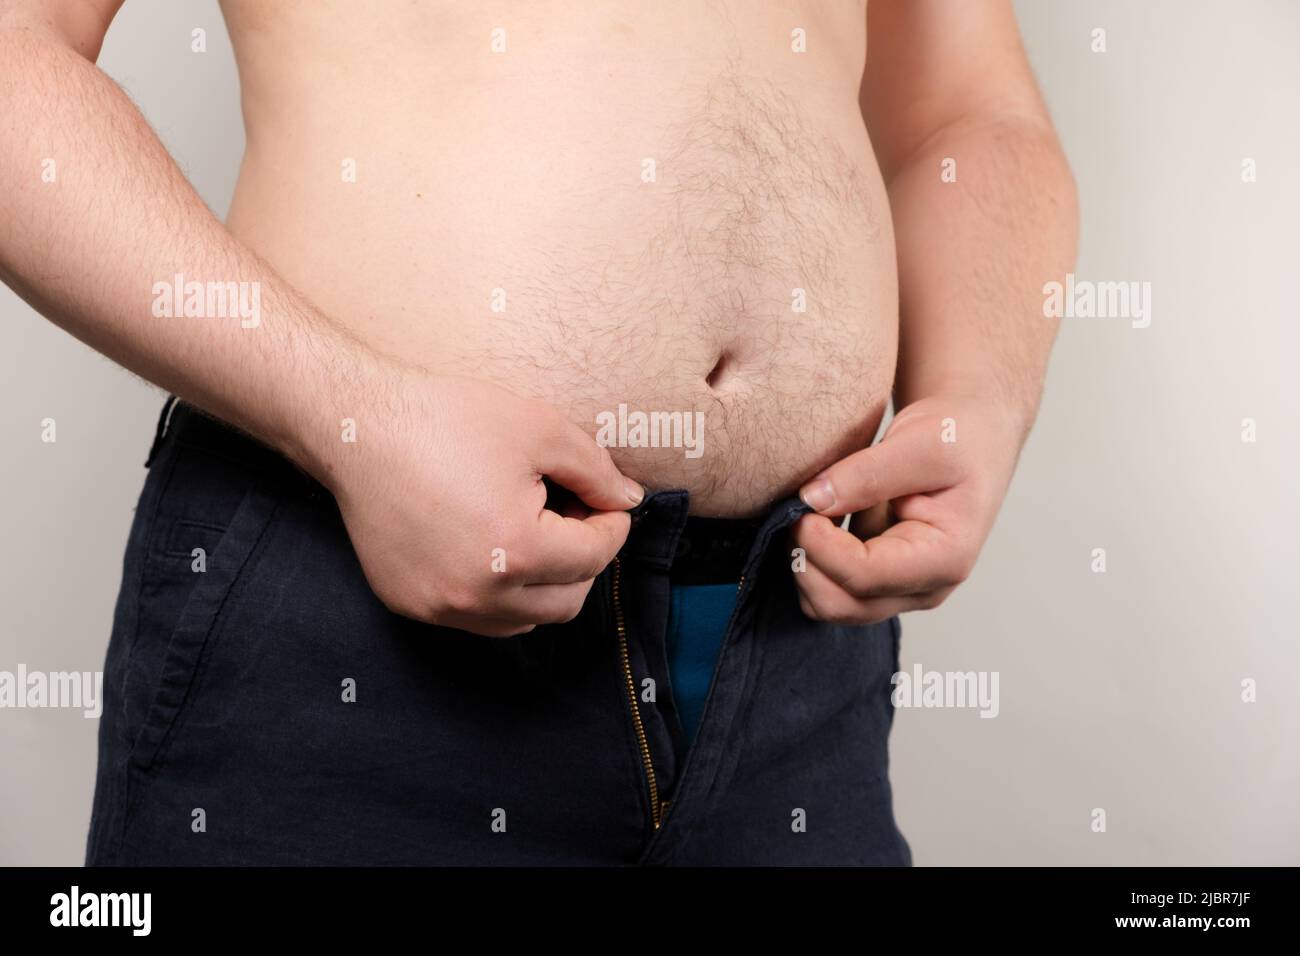 https://c8.alamy.com/comp/2JBR7JF/a-man-tries-to-fasten-his-small-pants-the-concept-of-male-obesity-excess-weight-2JBR7JF.jpg